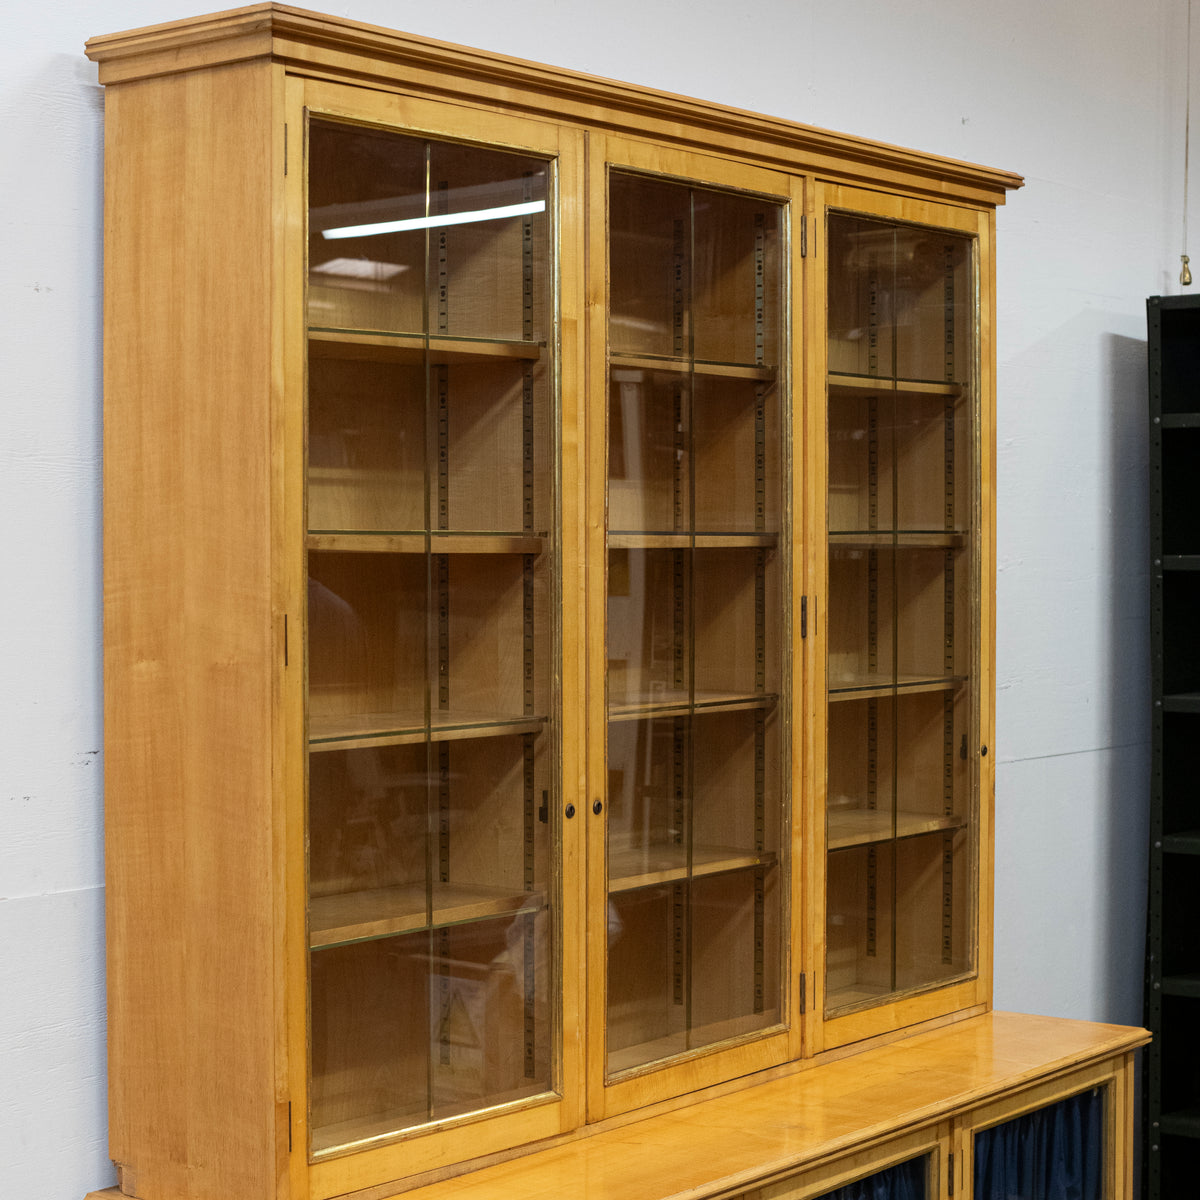 Reclaimed Mid-Century Georgian Style Bookcase | Glazed Cabinet | The Architectural Forum